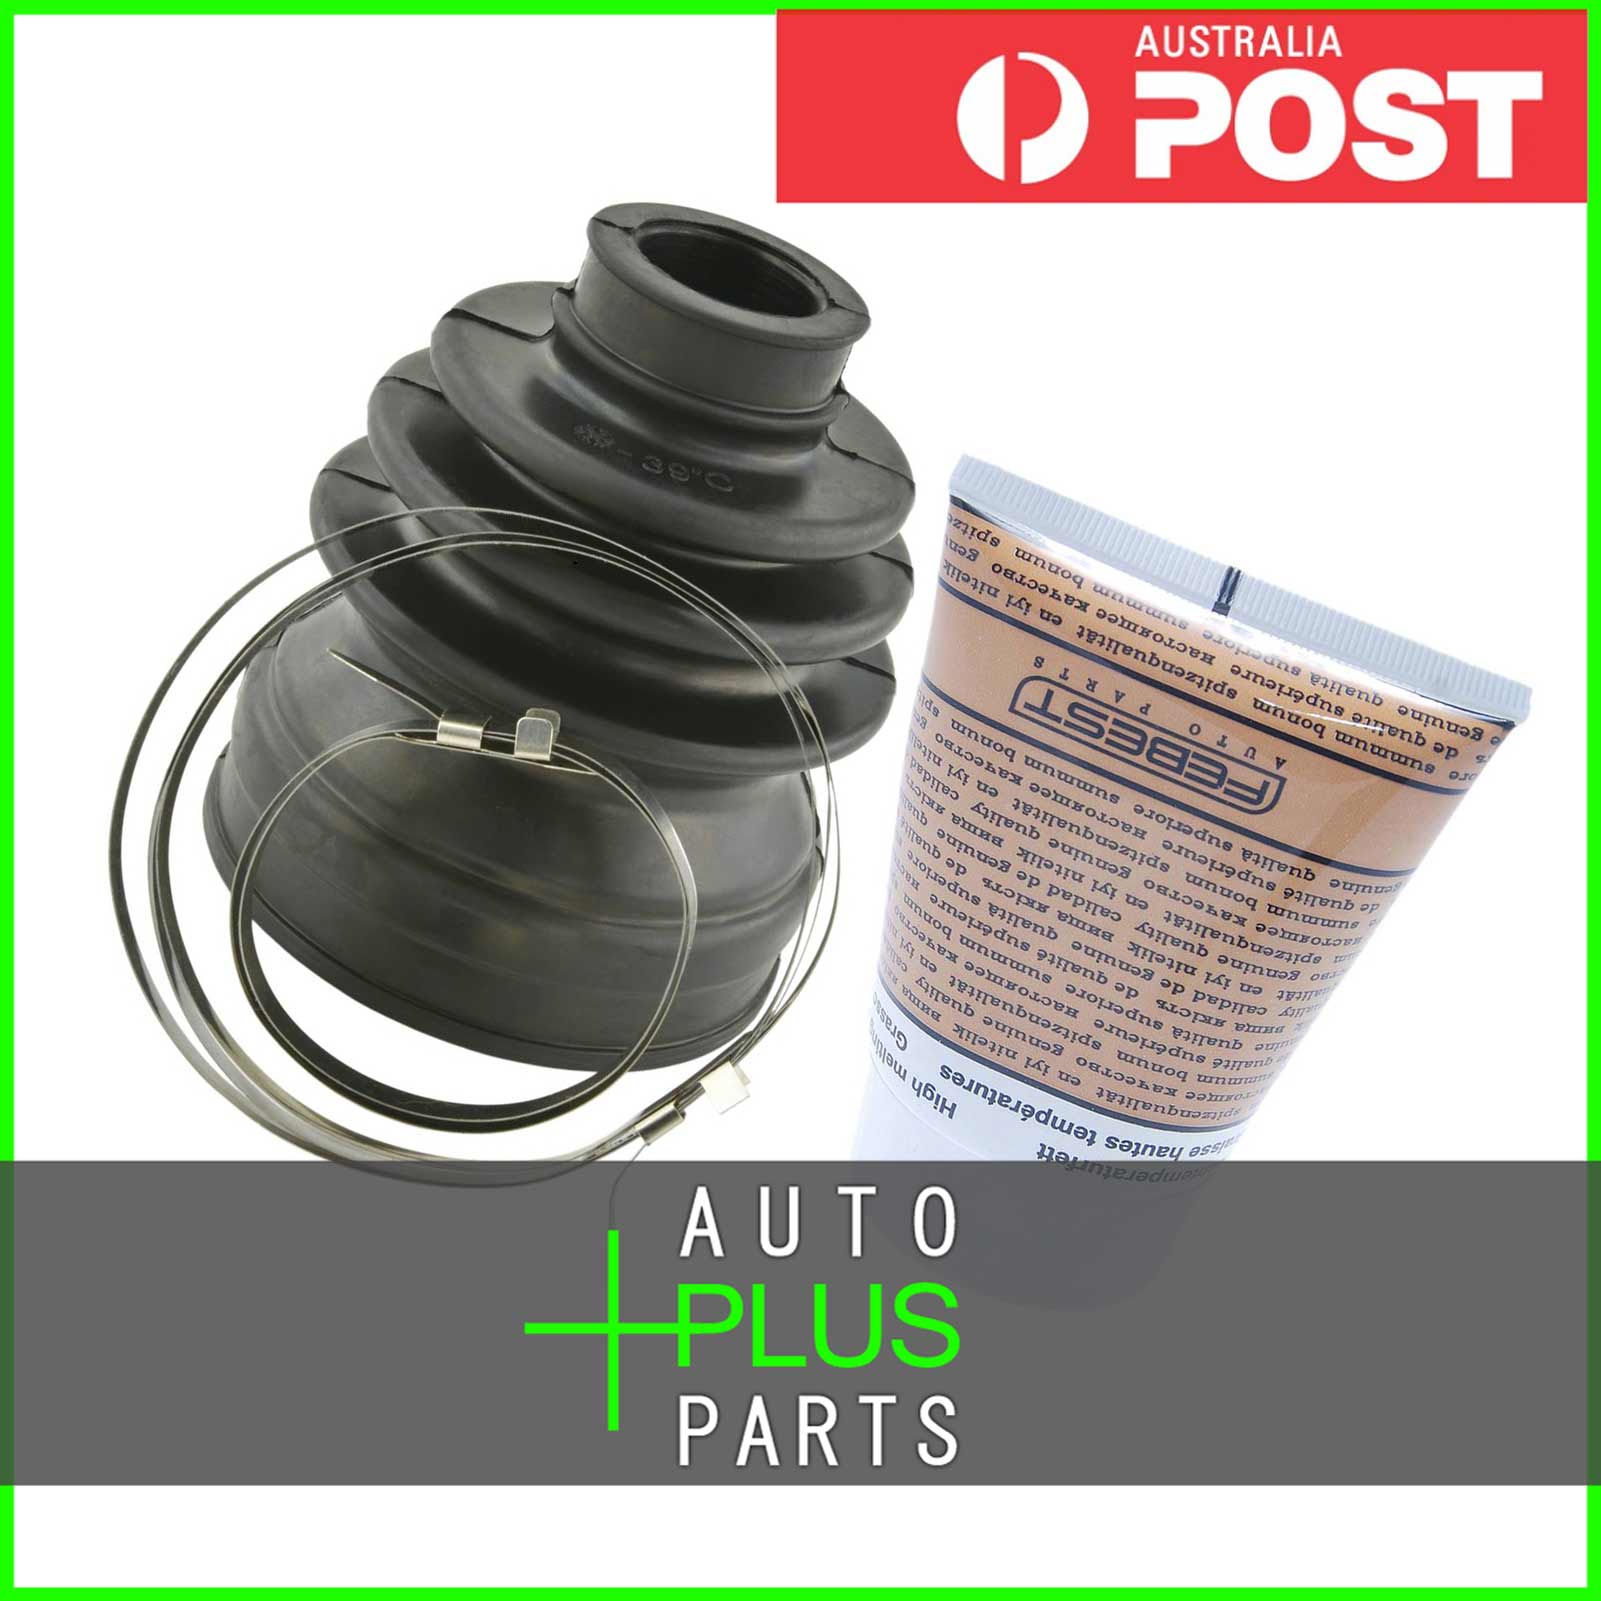 Fits CHEVROLET LACETTI/OPTRA - BOOT INNER CV JOINT KIT 66.5X96X23.3 | eBay